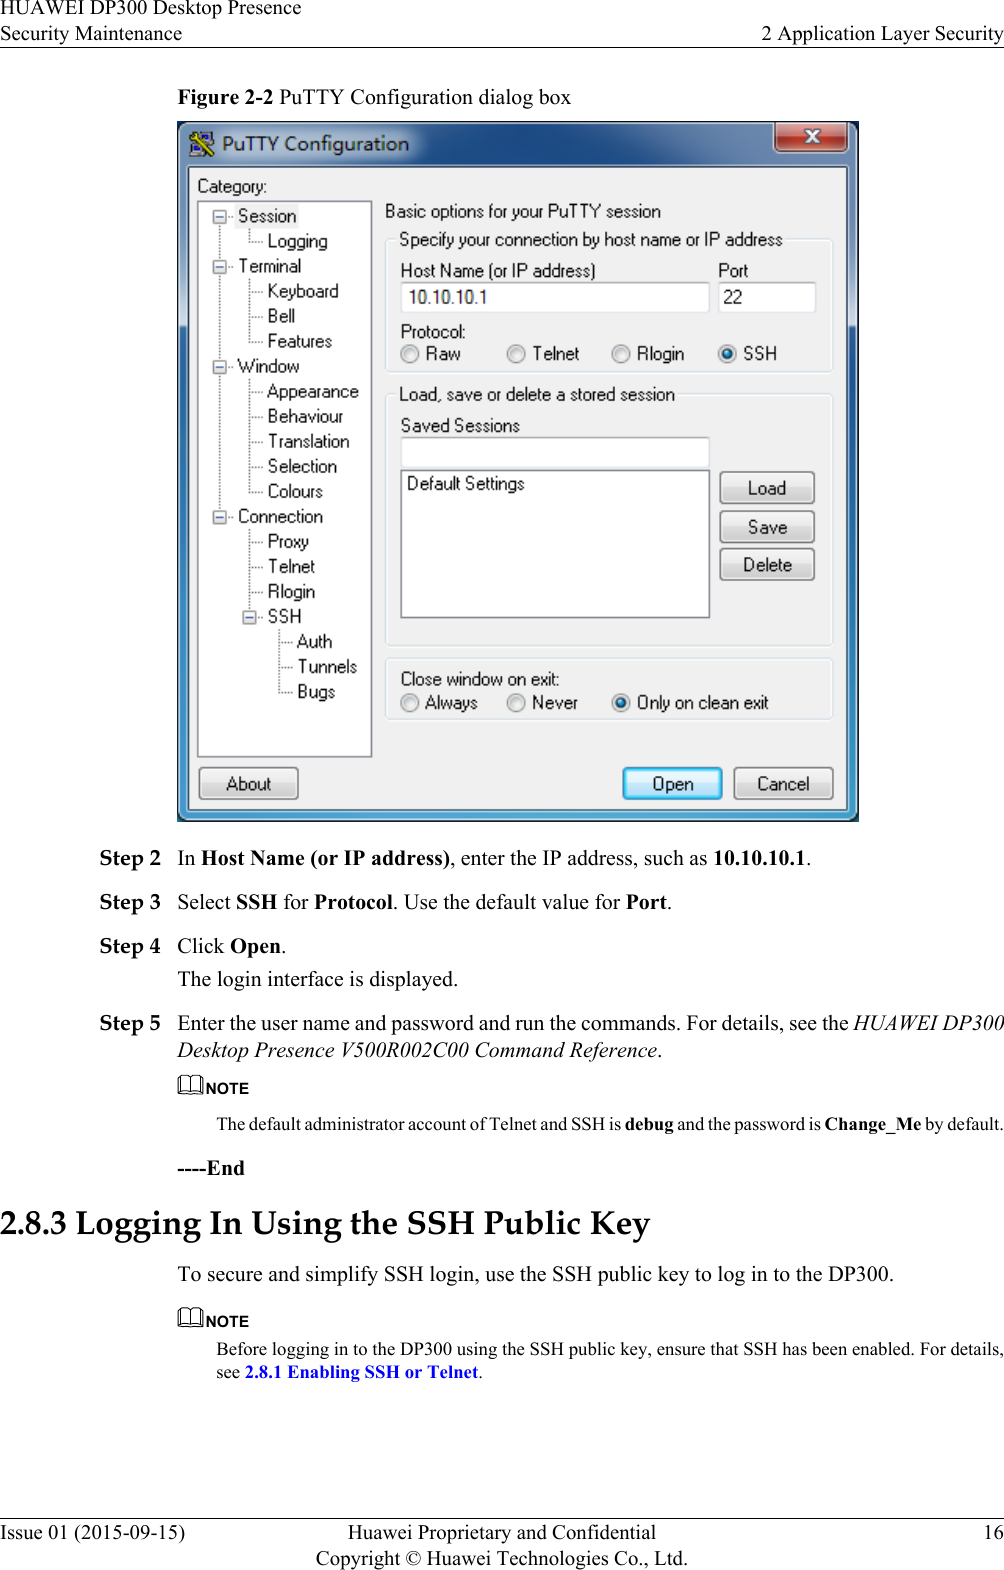 Figure 2-2 PuTTY Configuration dialog boxStep 2 In Host Name (or IP address), enter the IP address, such as 10.10.10.1.Step 3 Select SSH for Protocol. Use the default value for Port.Step 4 Click Open.The login interface is displayed.Step 5 Enter the user name and password and run the commands. For details, see the HUAWEI DP300Desktop Presence V500R002C00 Command Reference.NOTEThe default administrator account of Telnet and SSH is debug and the password is Change_Me by default.----End2.8.3 Logging In Using the SSH Public KeyTo secure and simplify SSH login, use the SSH public key to log in to the DP300.NOTEBefore logging in to the DP300 using the SSH public key, ensure that SSH has been enabled. For details,see 2.8.1 Enabling SSH or Telnet.HUAWEI DP300 Desktop PresenceSecurity Maintenance 2 Application Layer SecurityIssue 01 (2015-09-15) Huawei Proprietary and ConfidentialCopyright © Huawei Technologies Co., Ltd.16